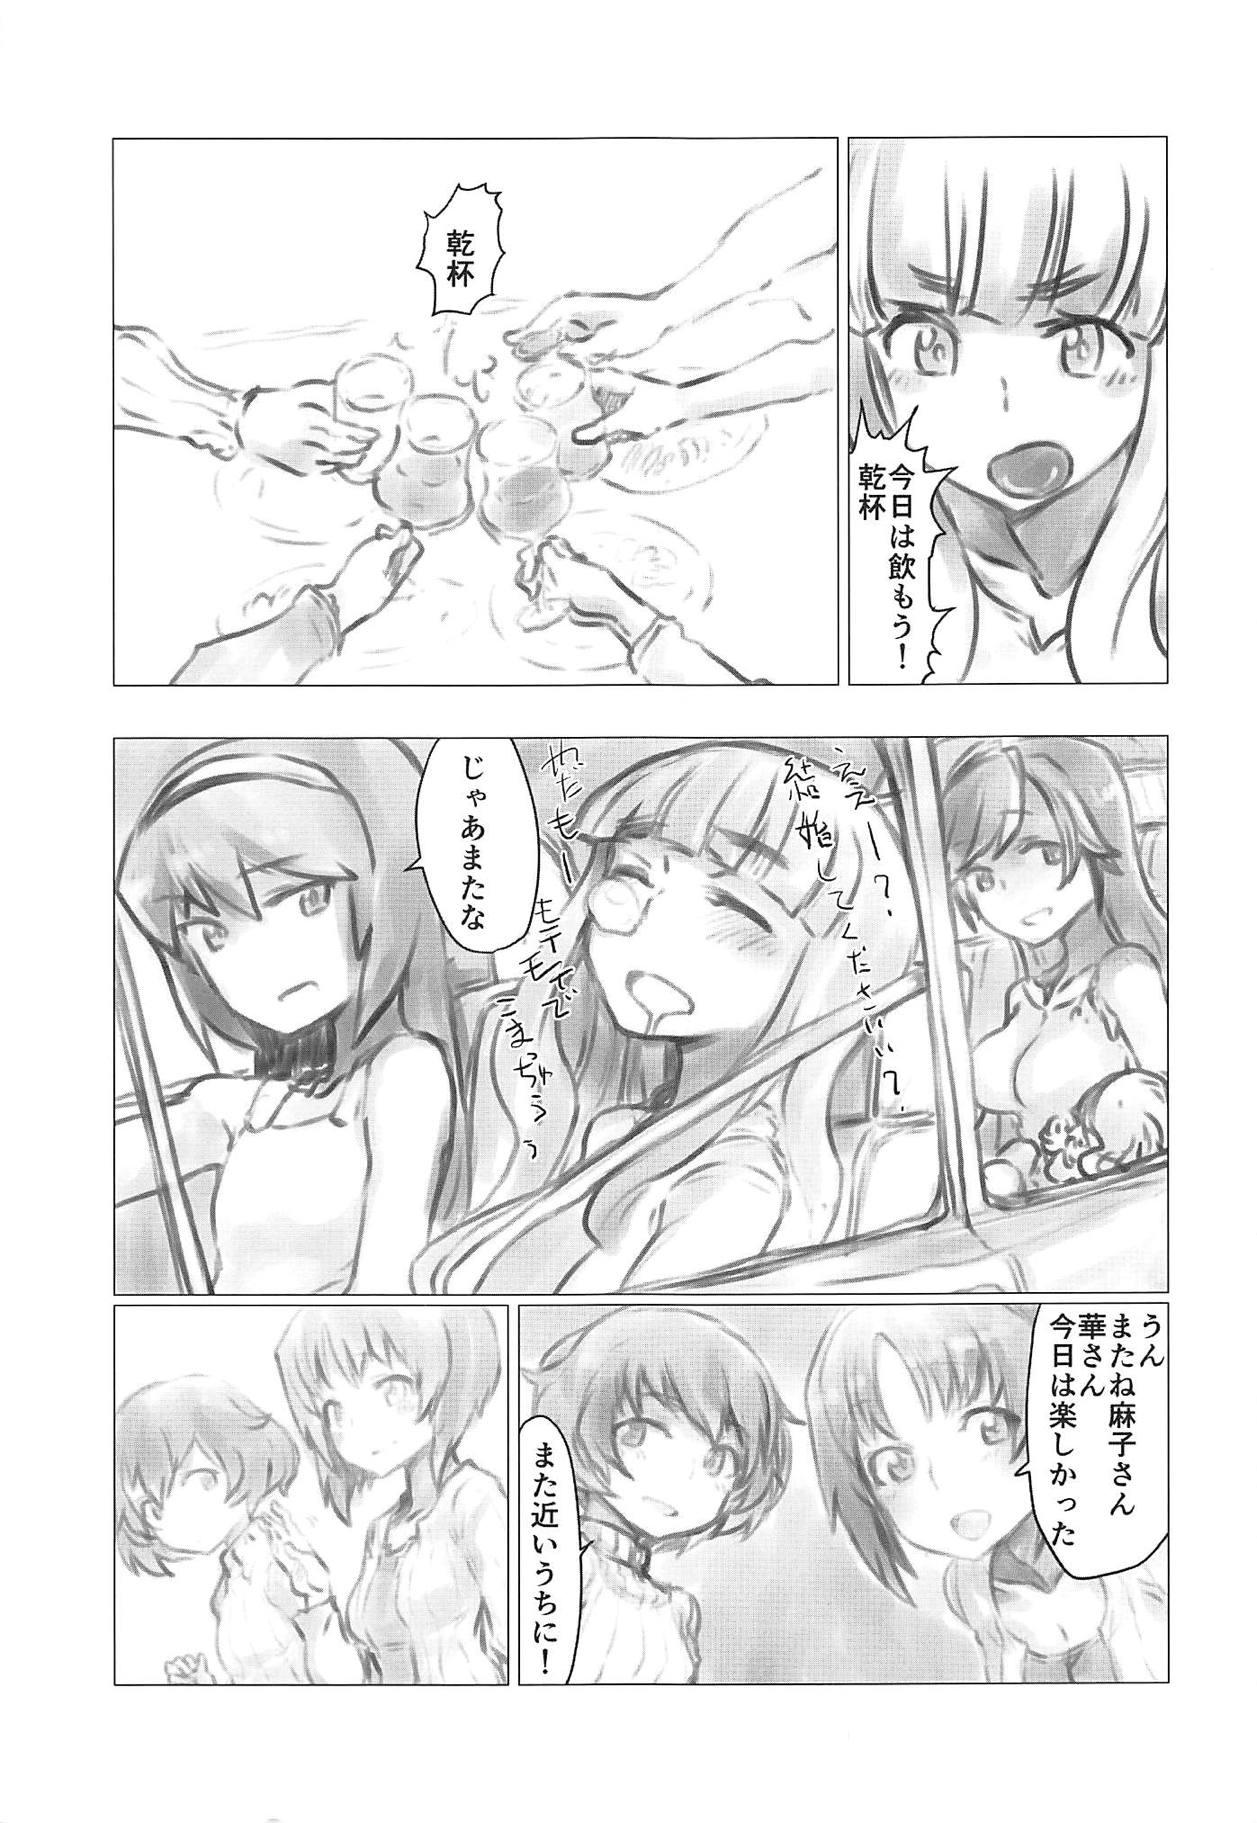 Moan THE DOG MAY STAND THE STRONG INSTEAD - Girls und panzer Juggs - Page 4